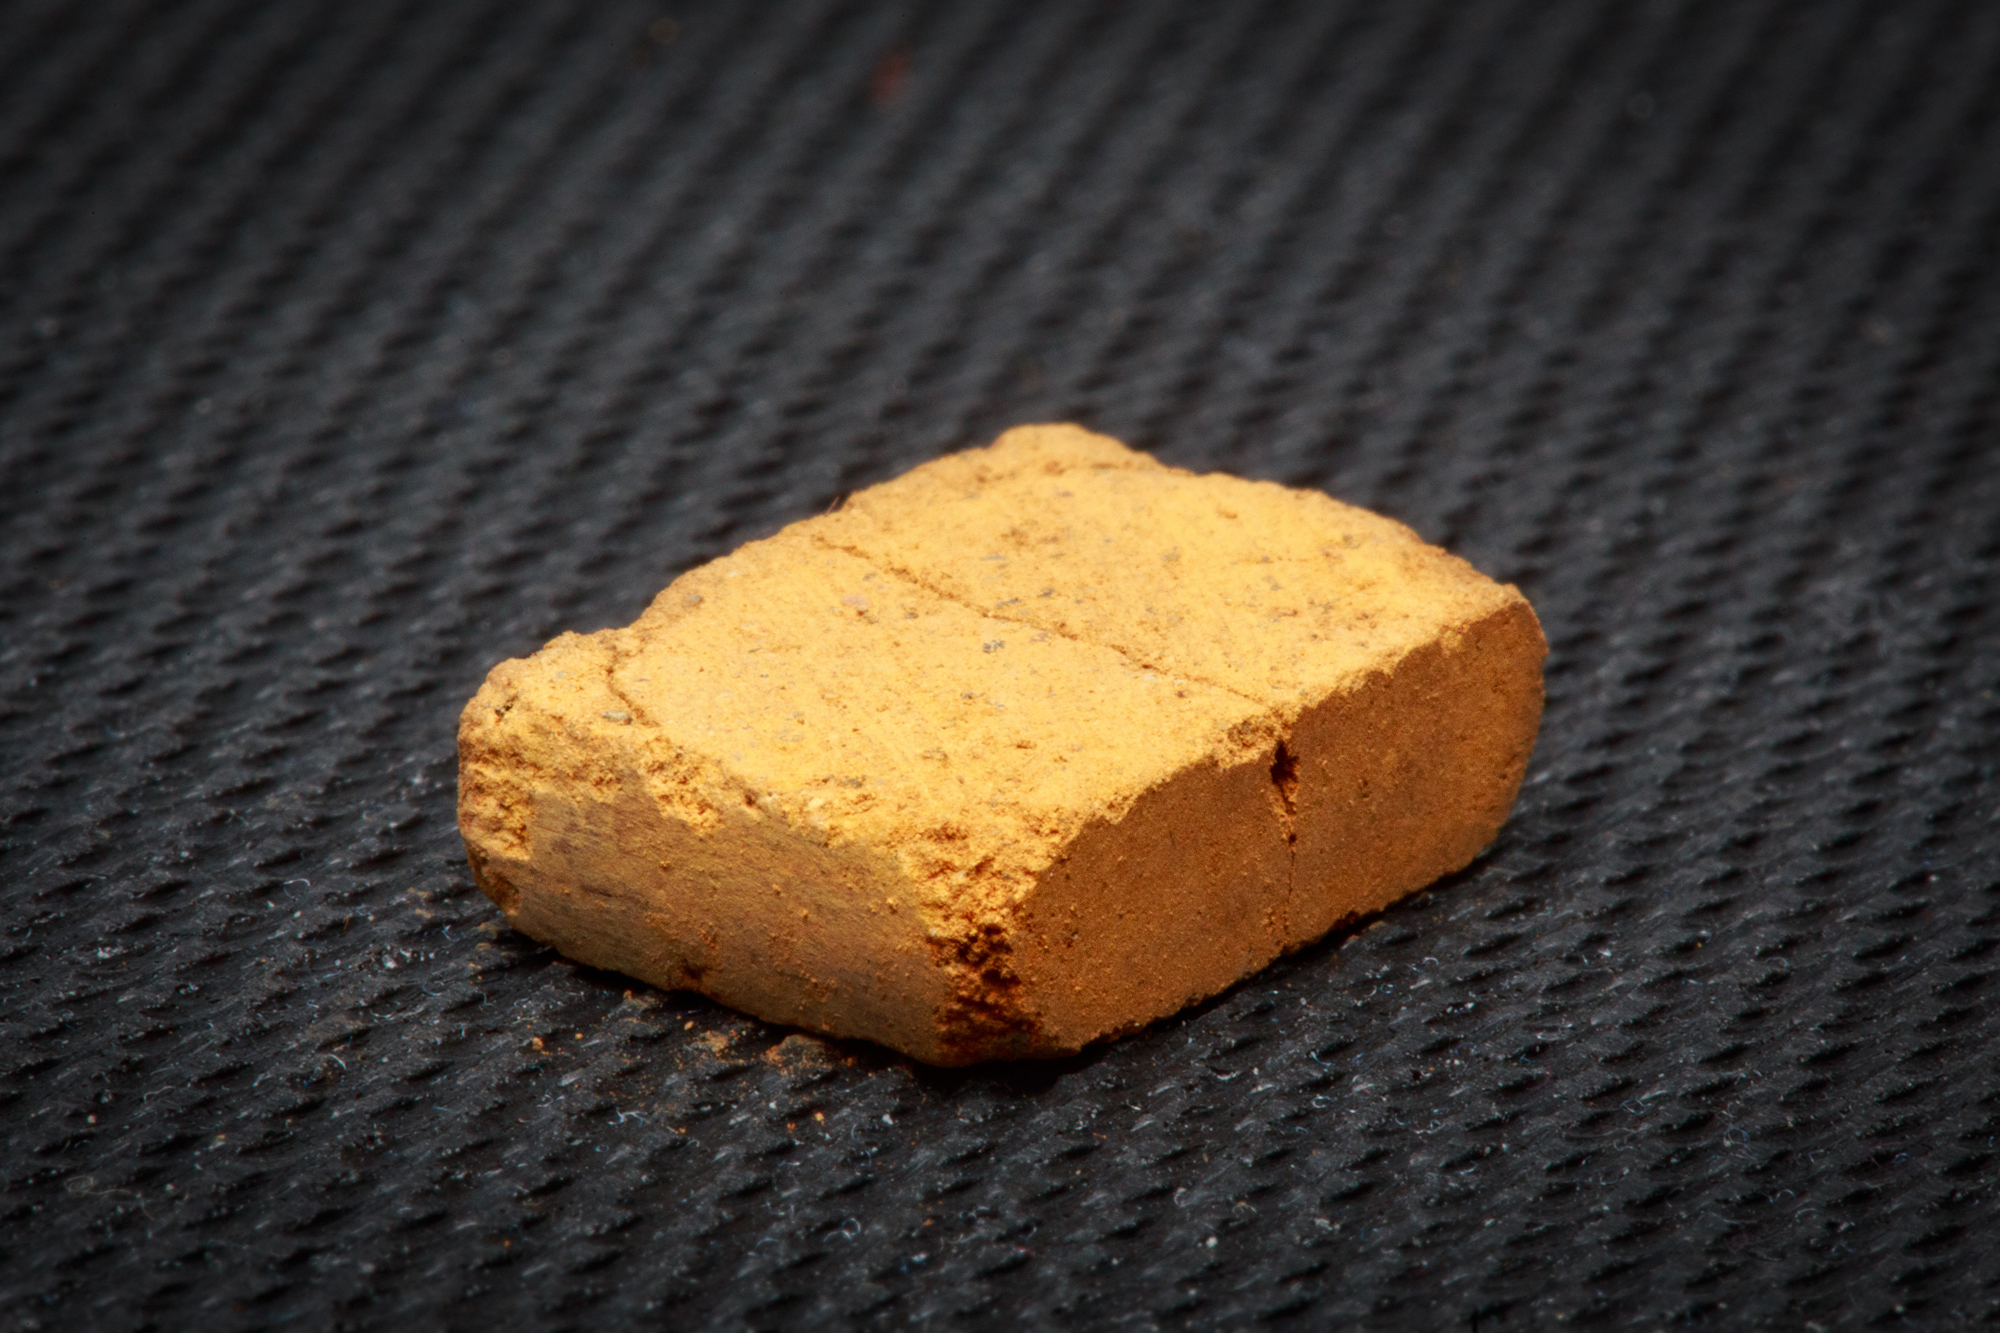 Bricks made from fake Martian soil are surprisingly strong